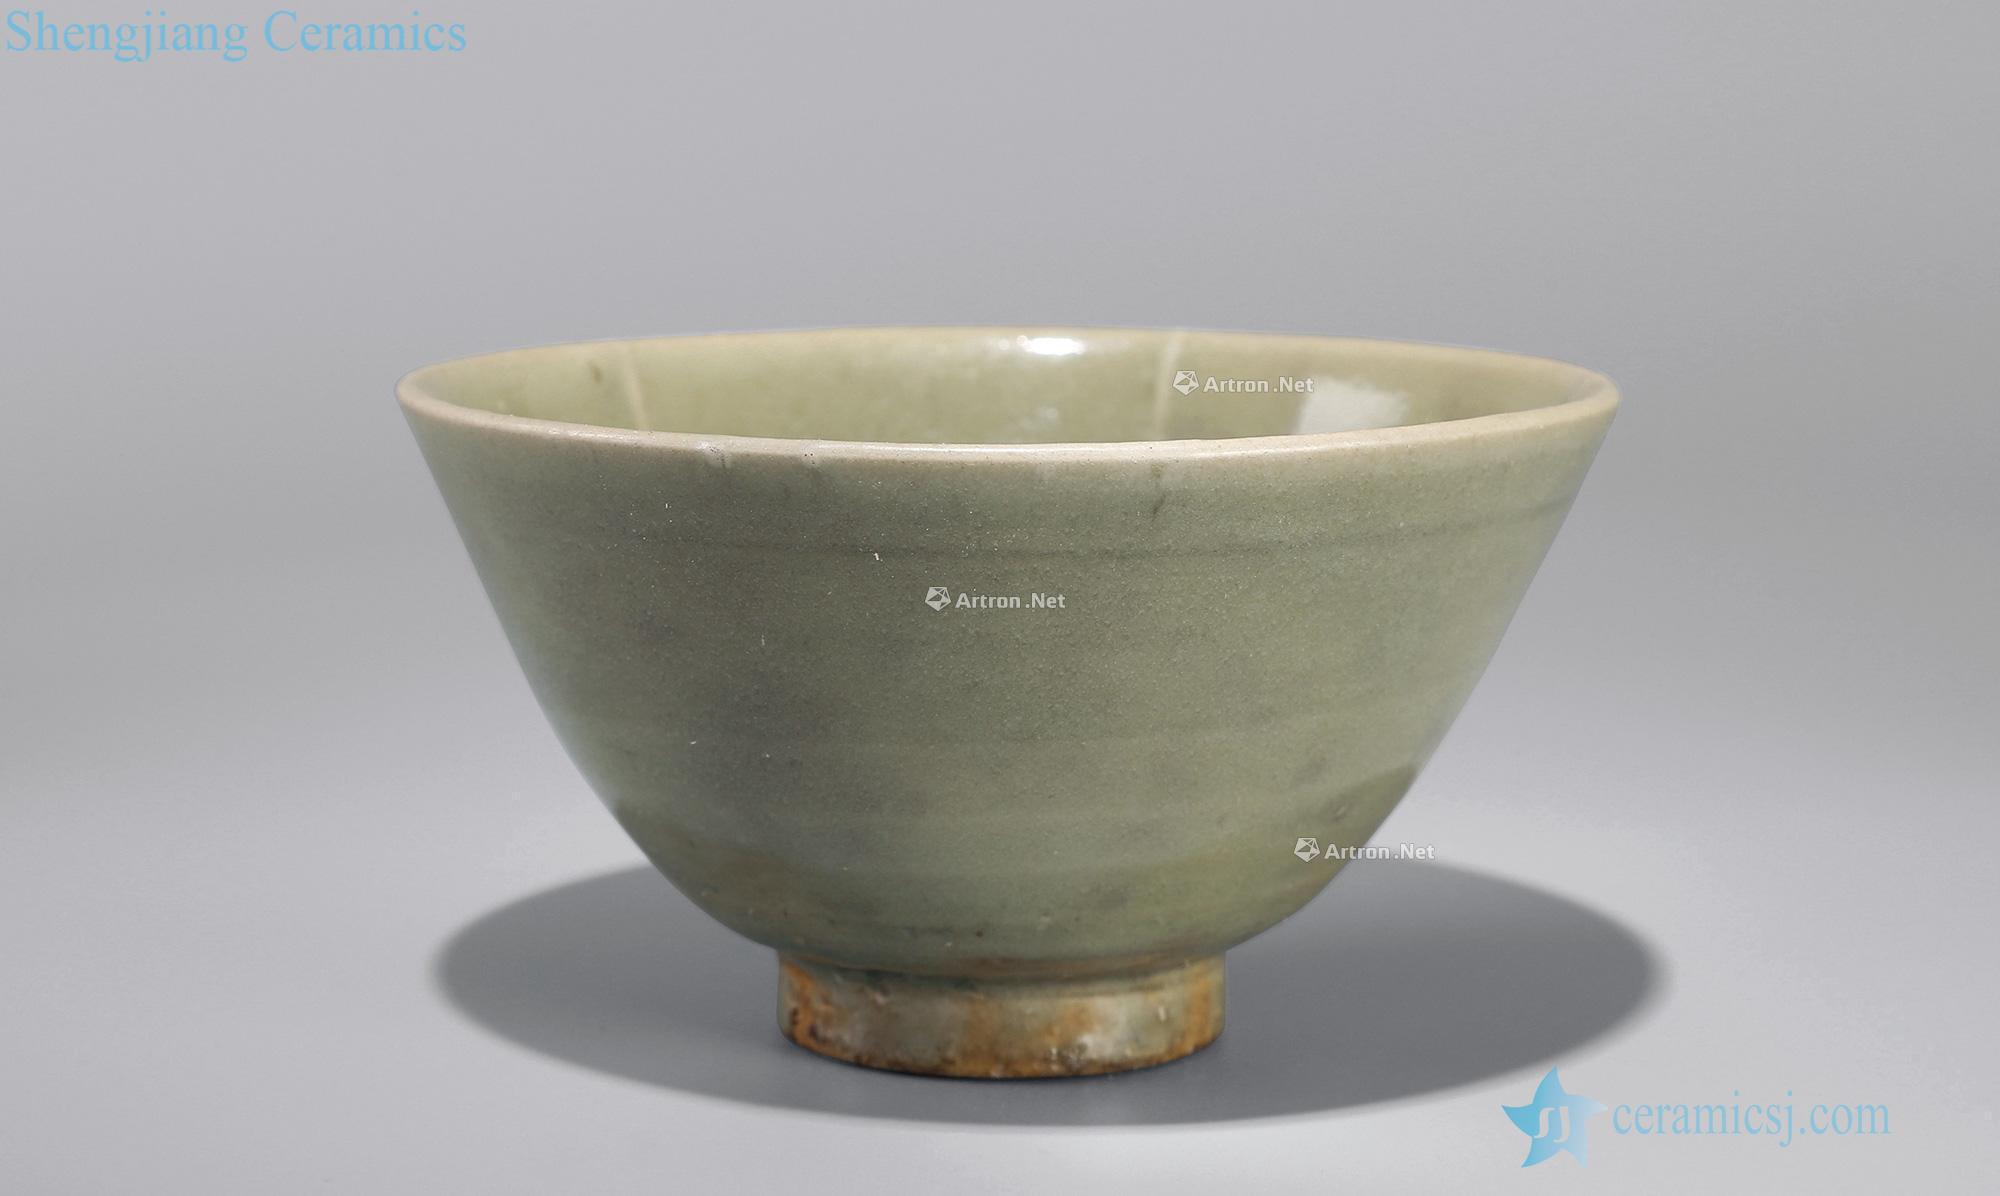 Northern song dynasty yao state kiln out jin wen bowl